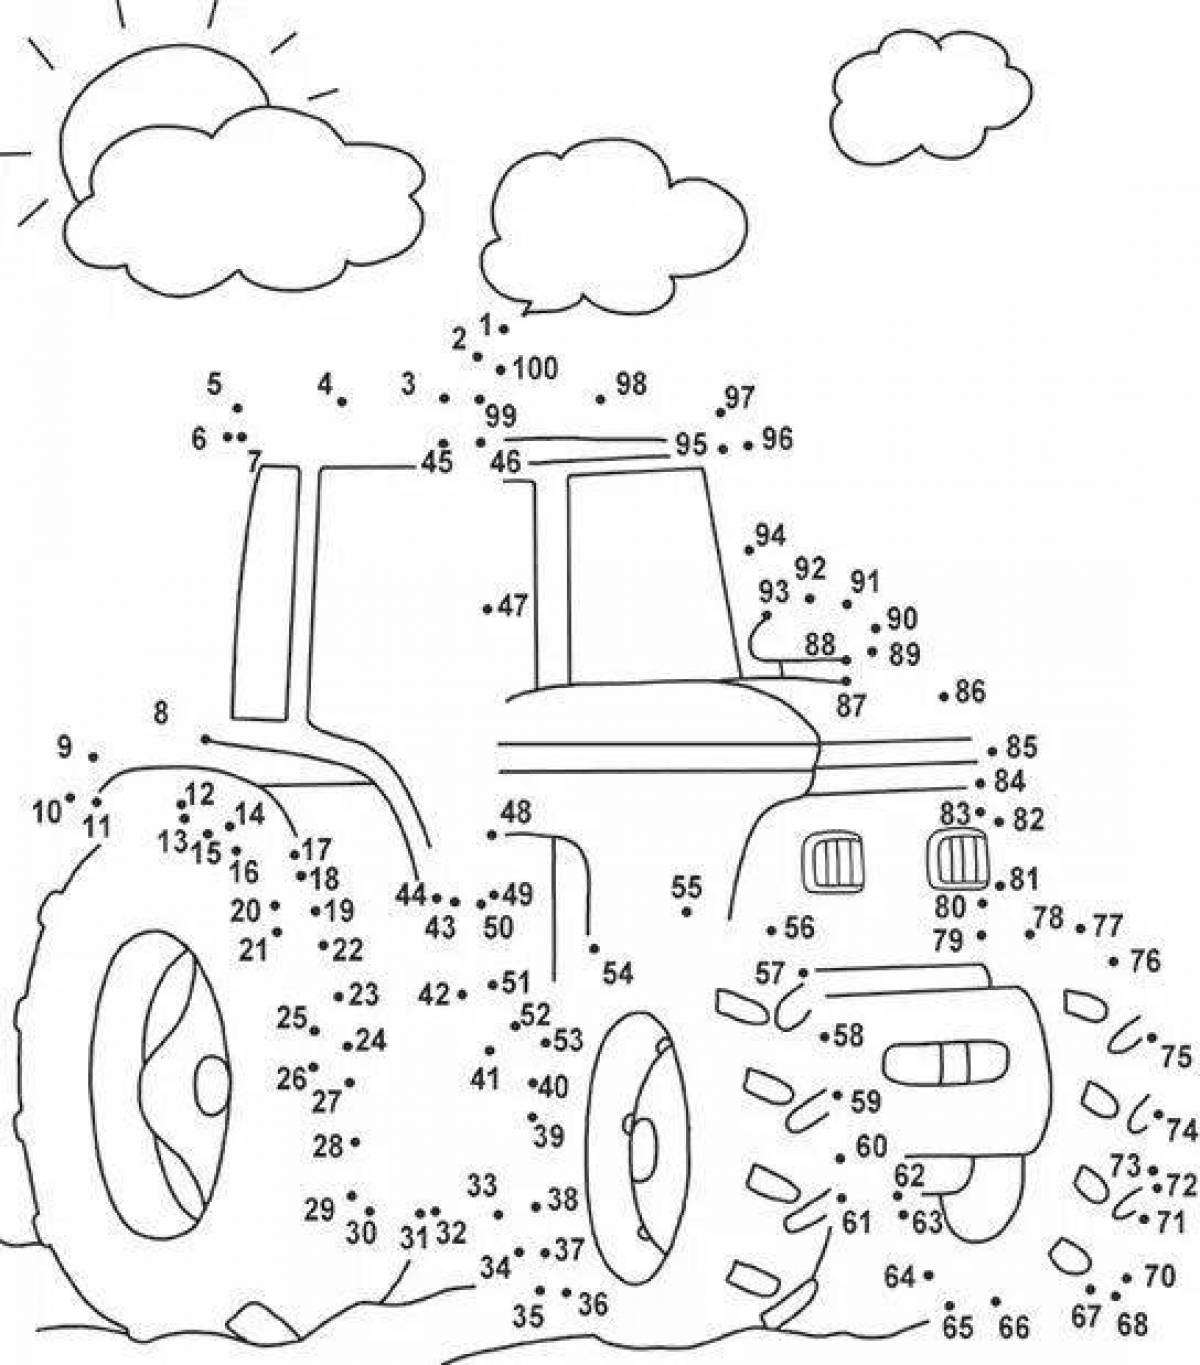 Connect by numbers fun coloring book